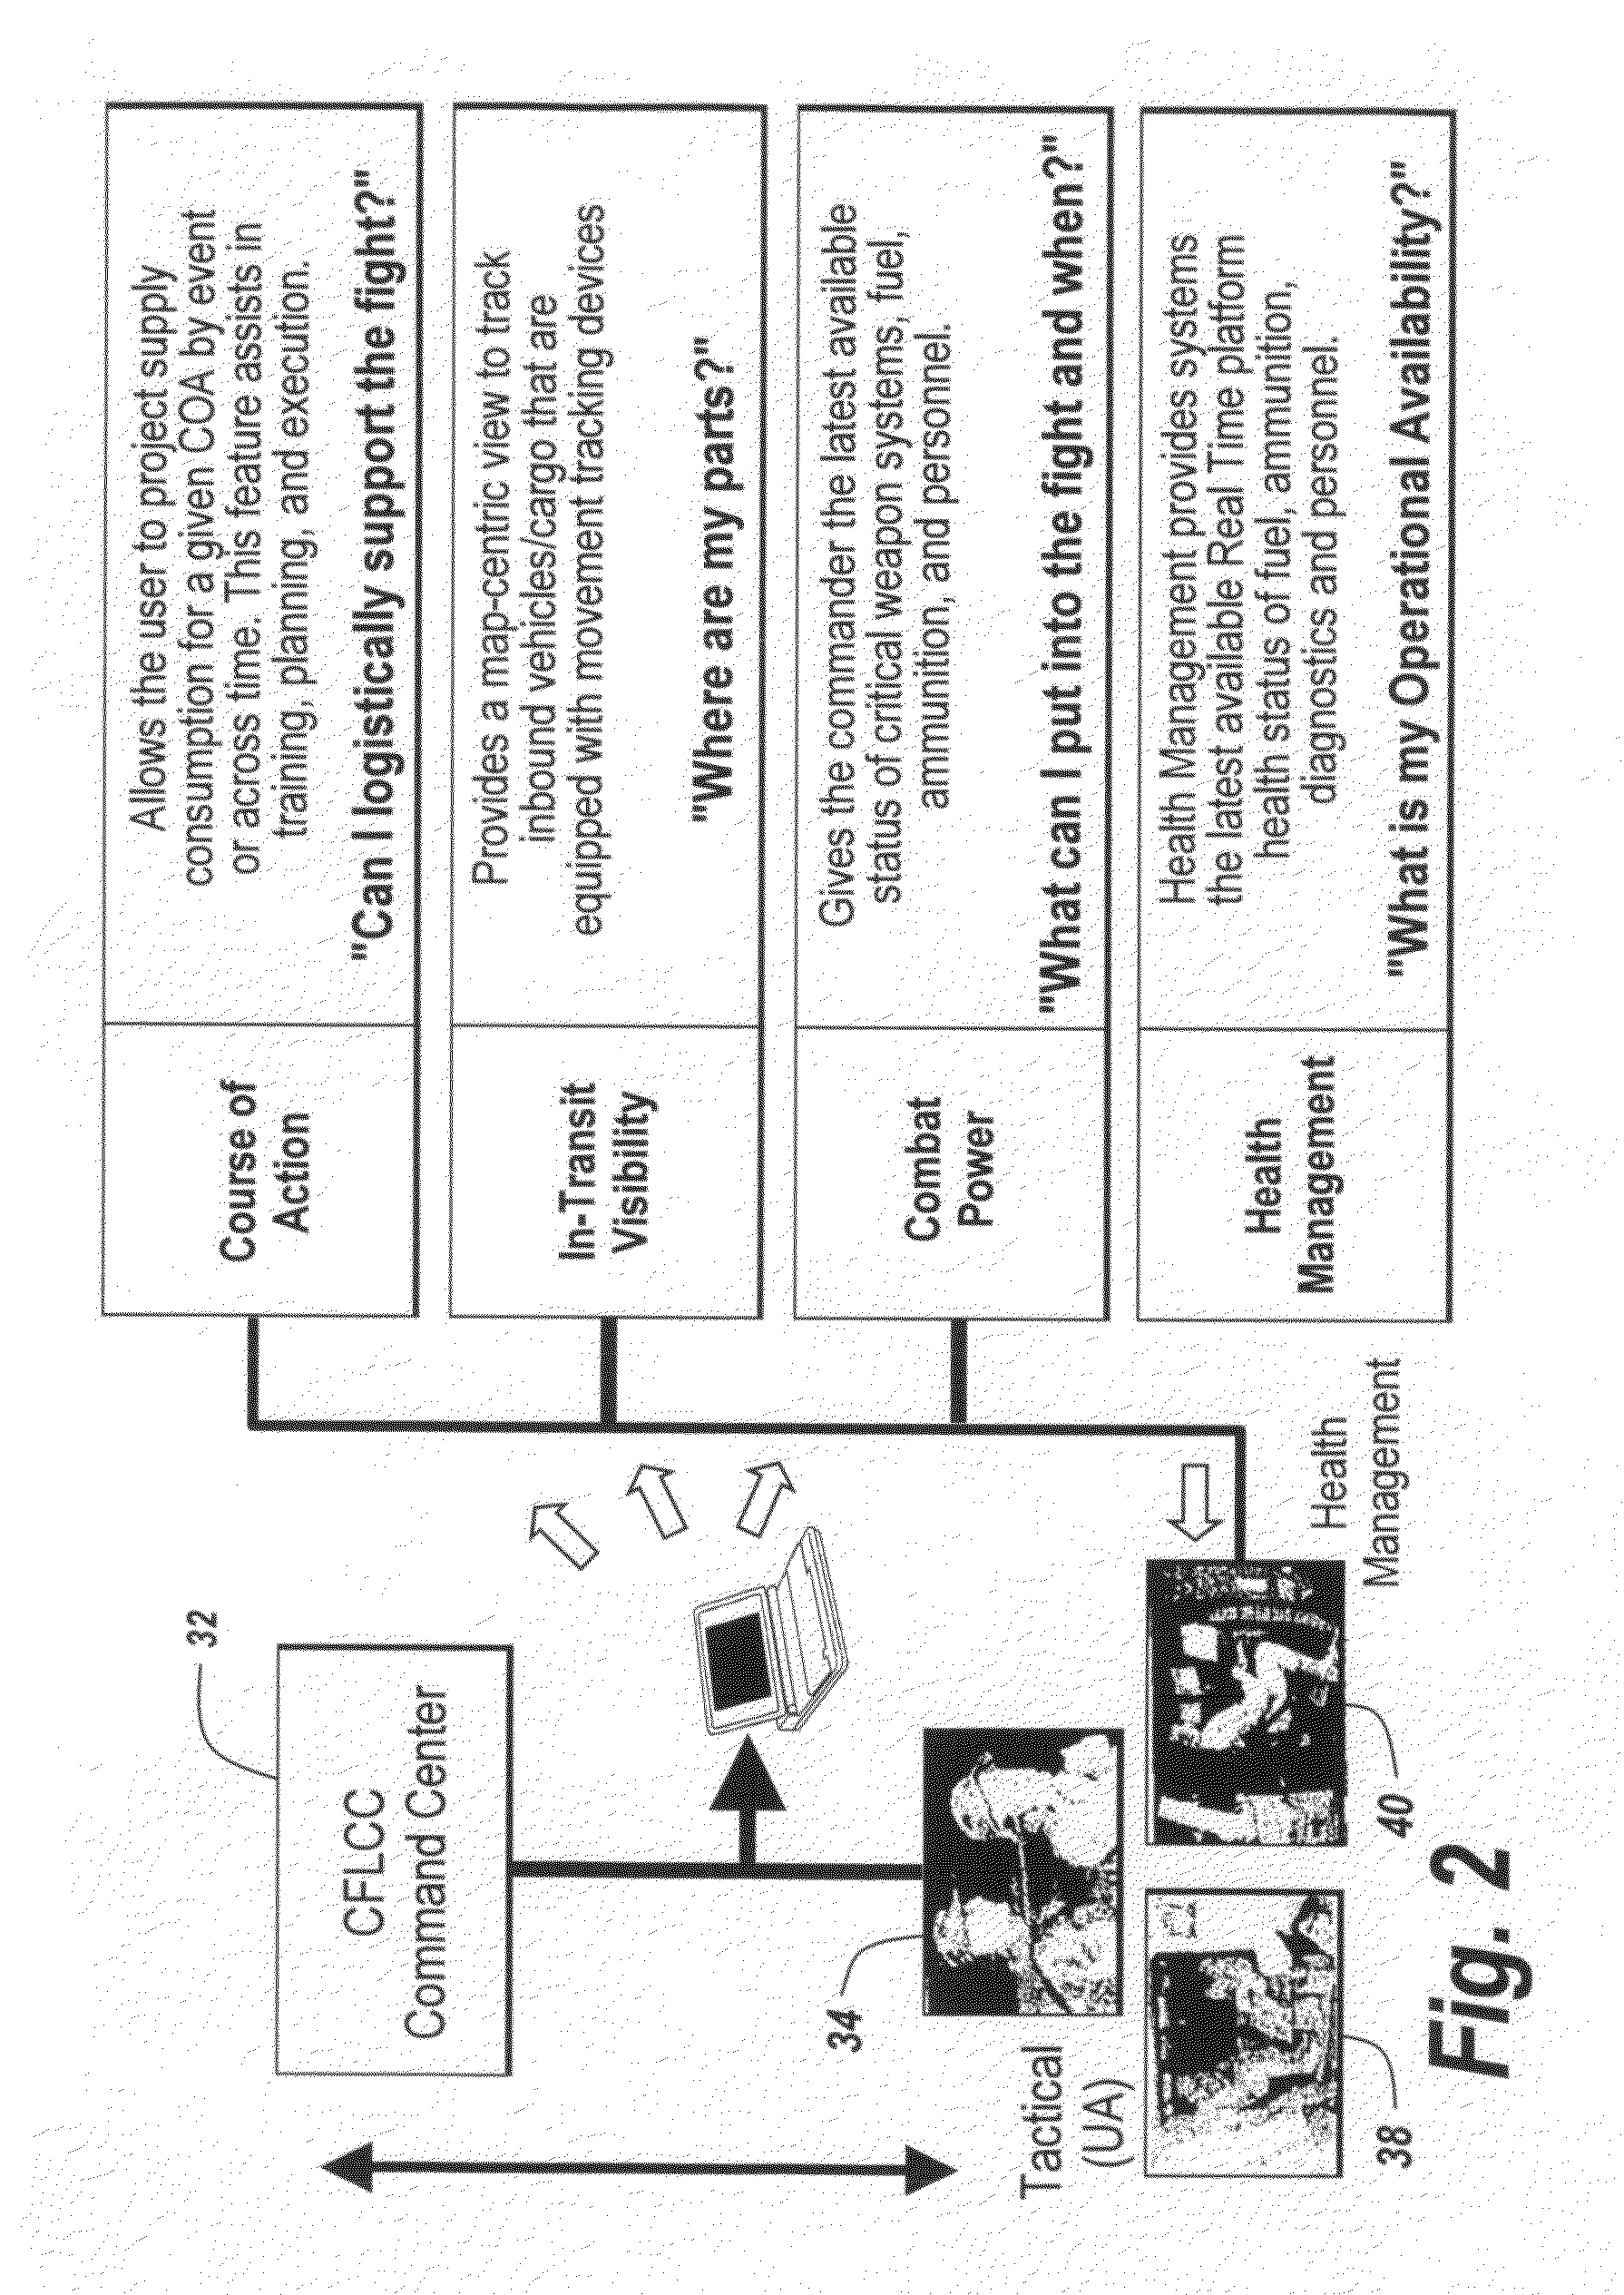 In service support center and method of operation